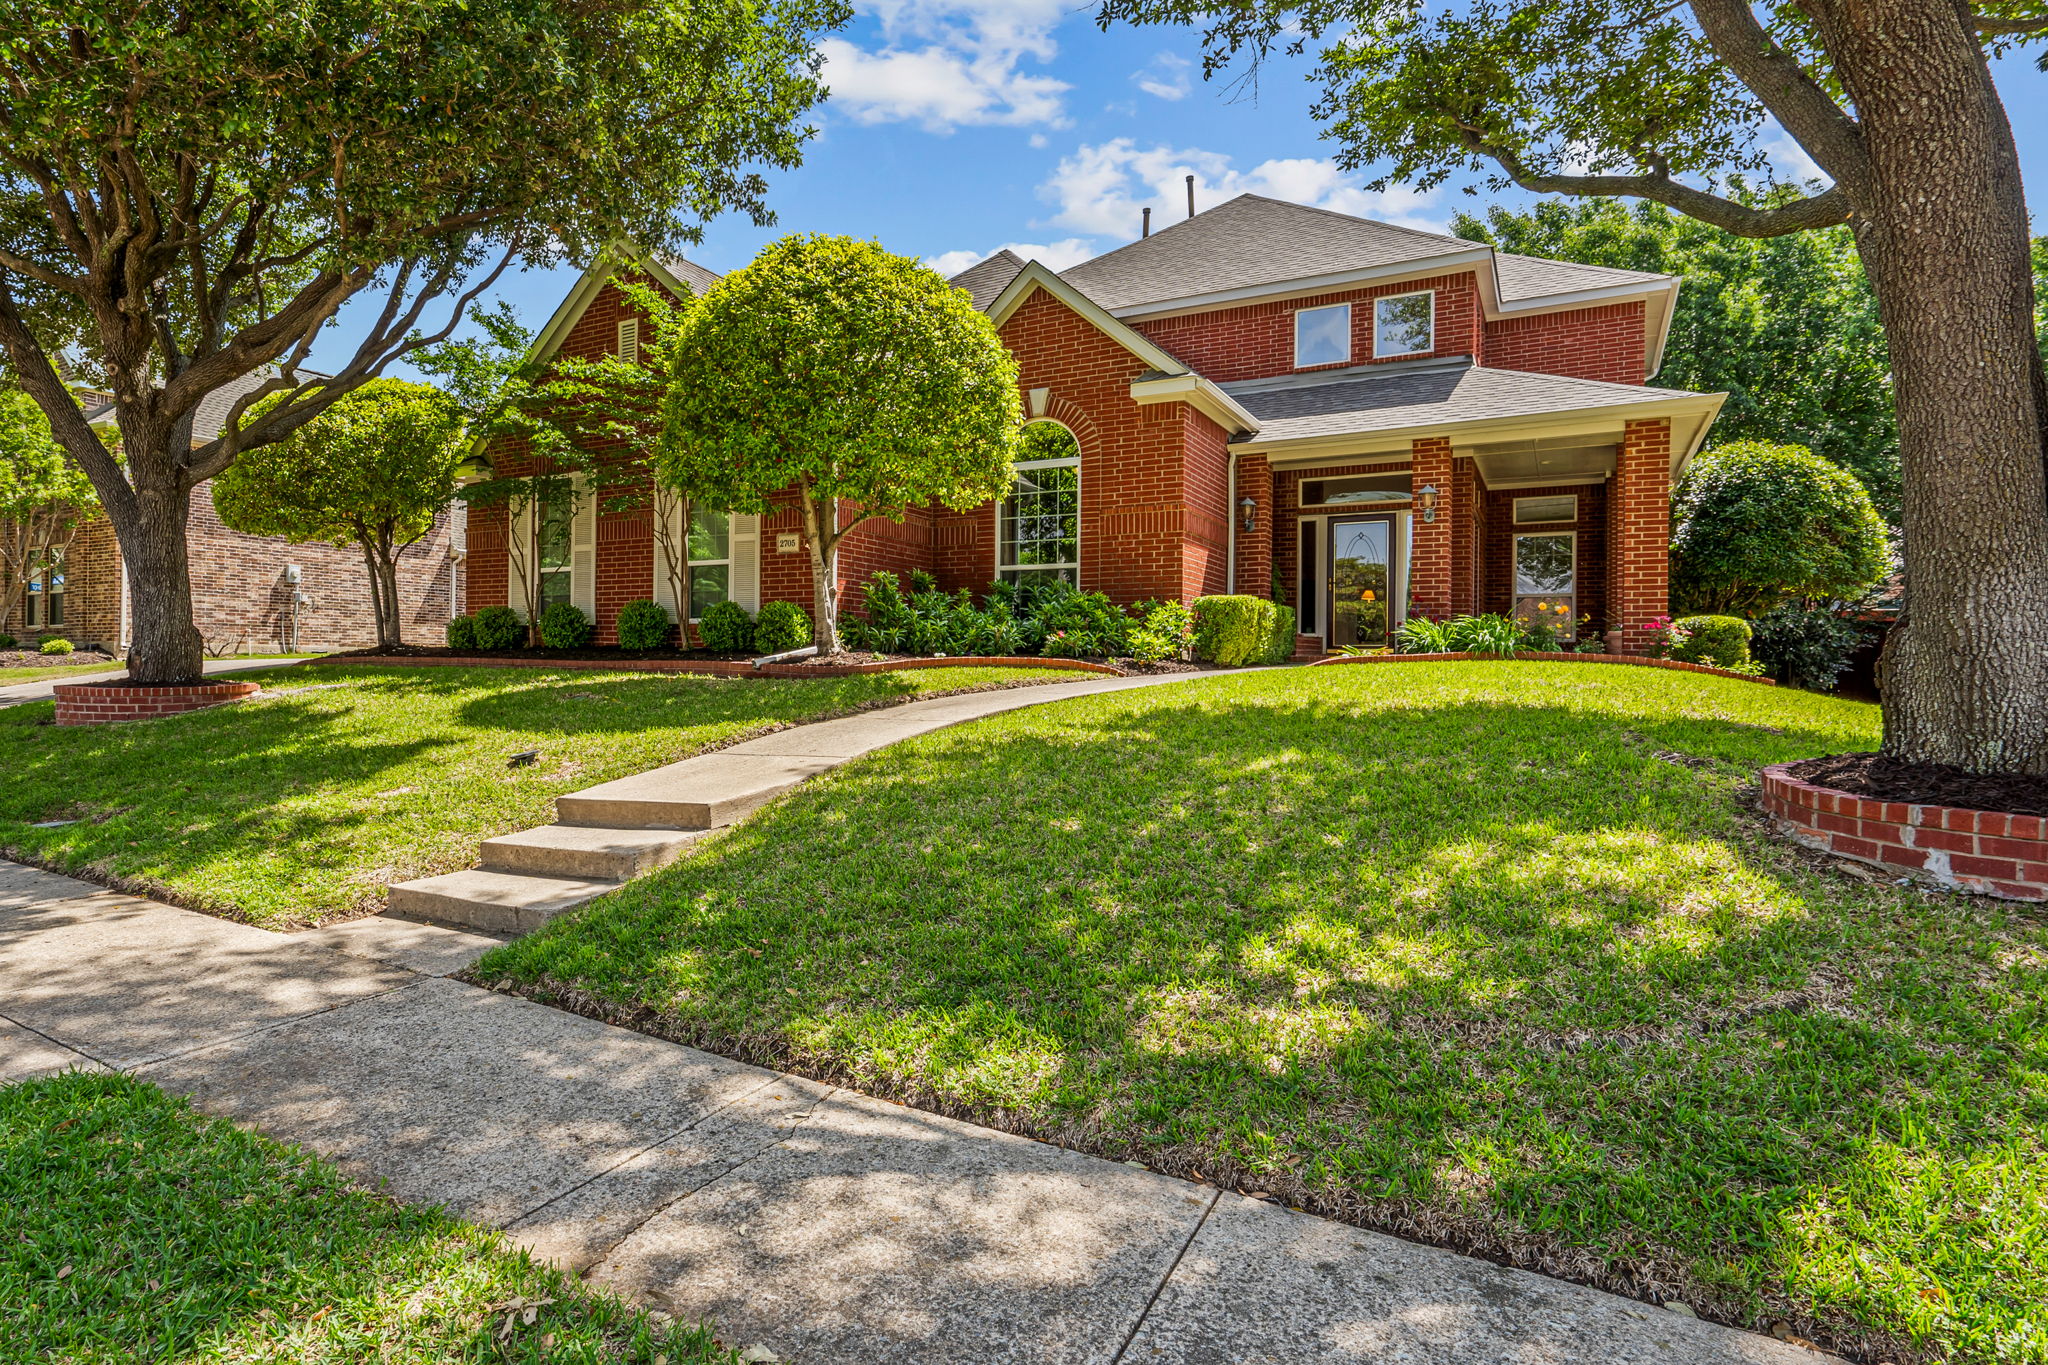 Discover Tranquility at 2705 Greenview Dr.